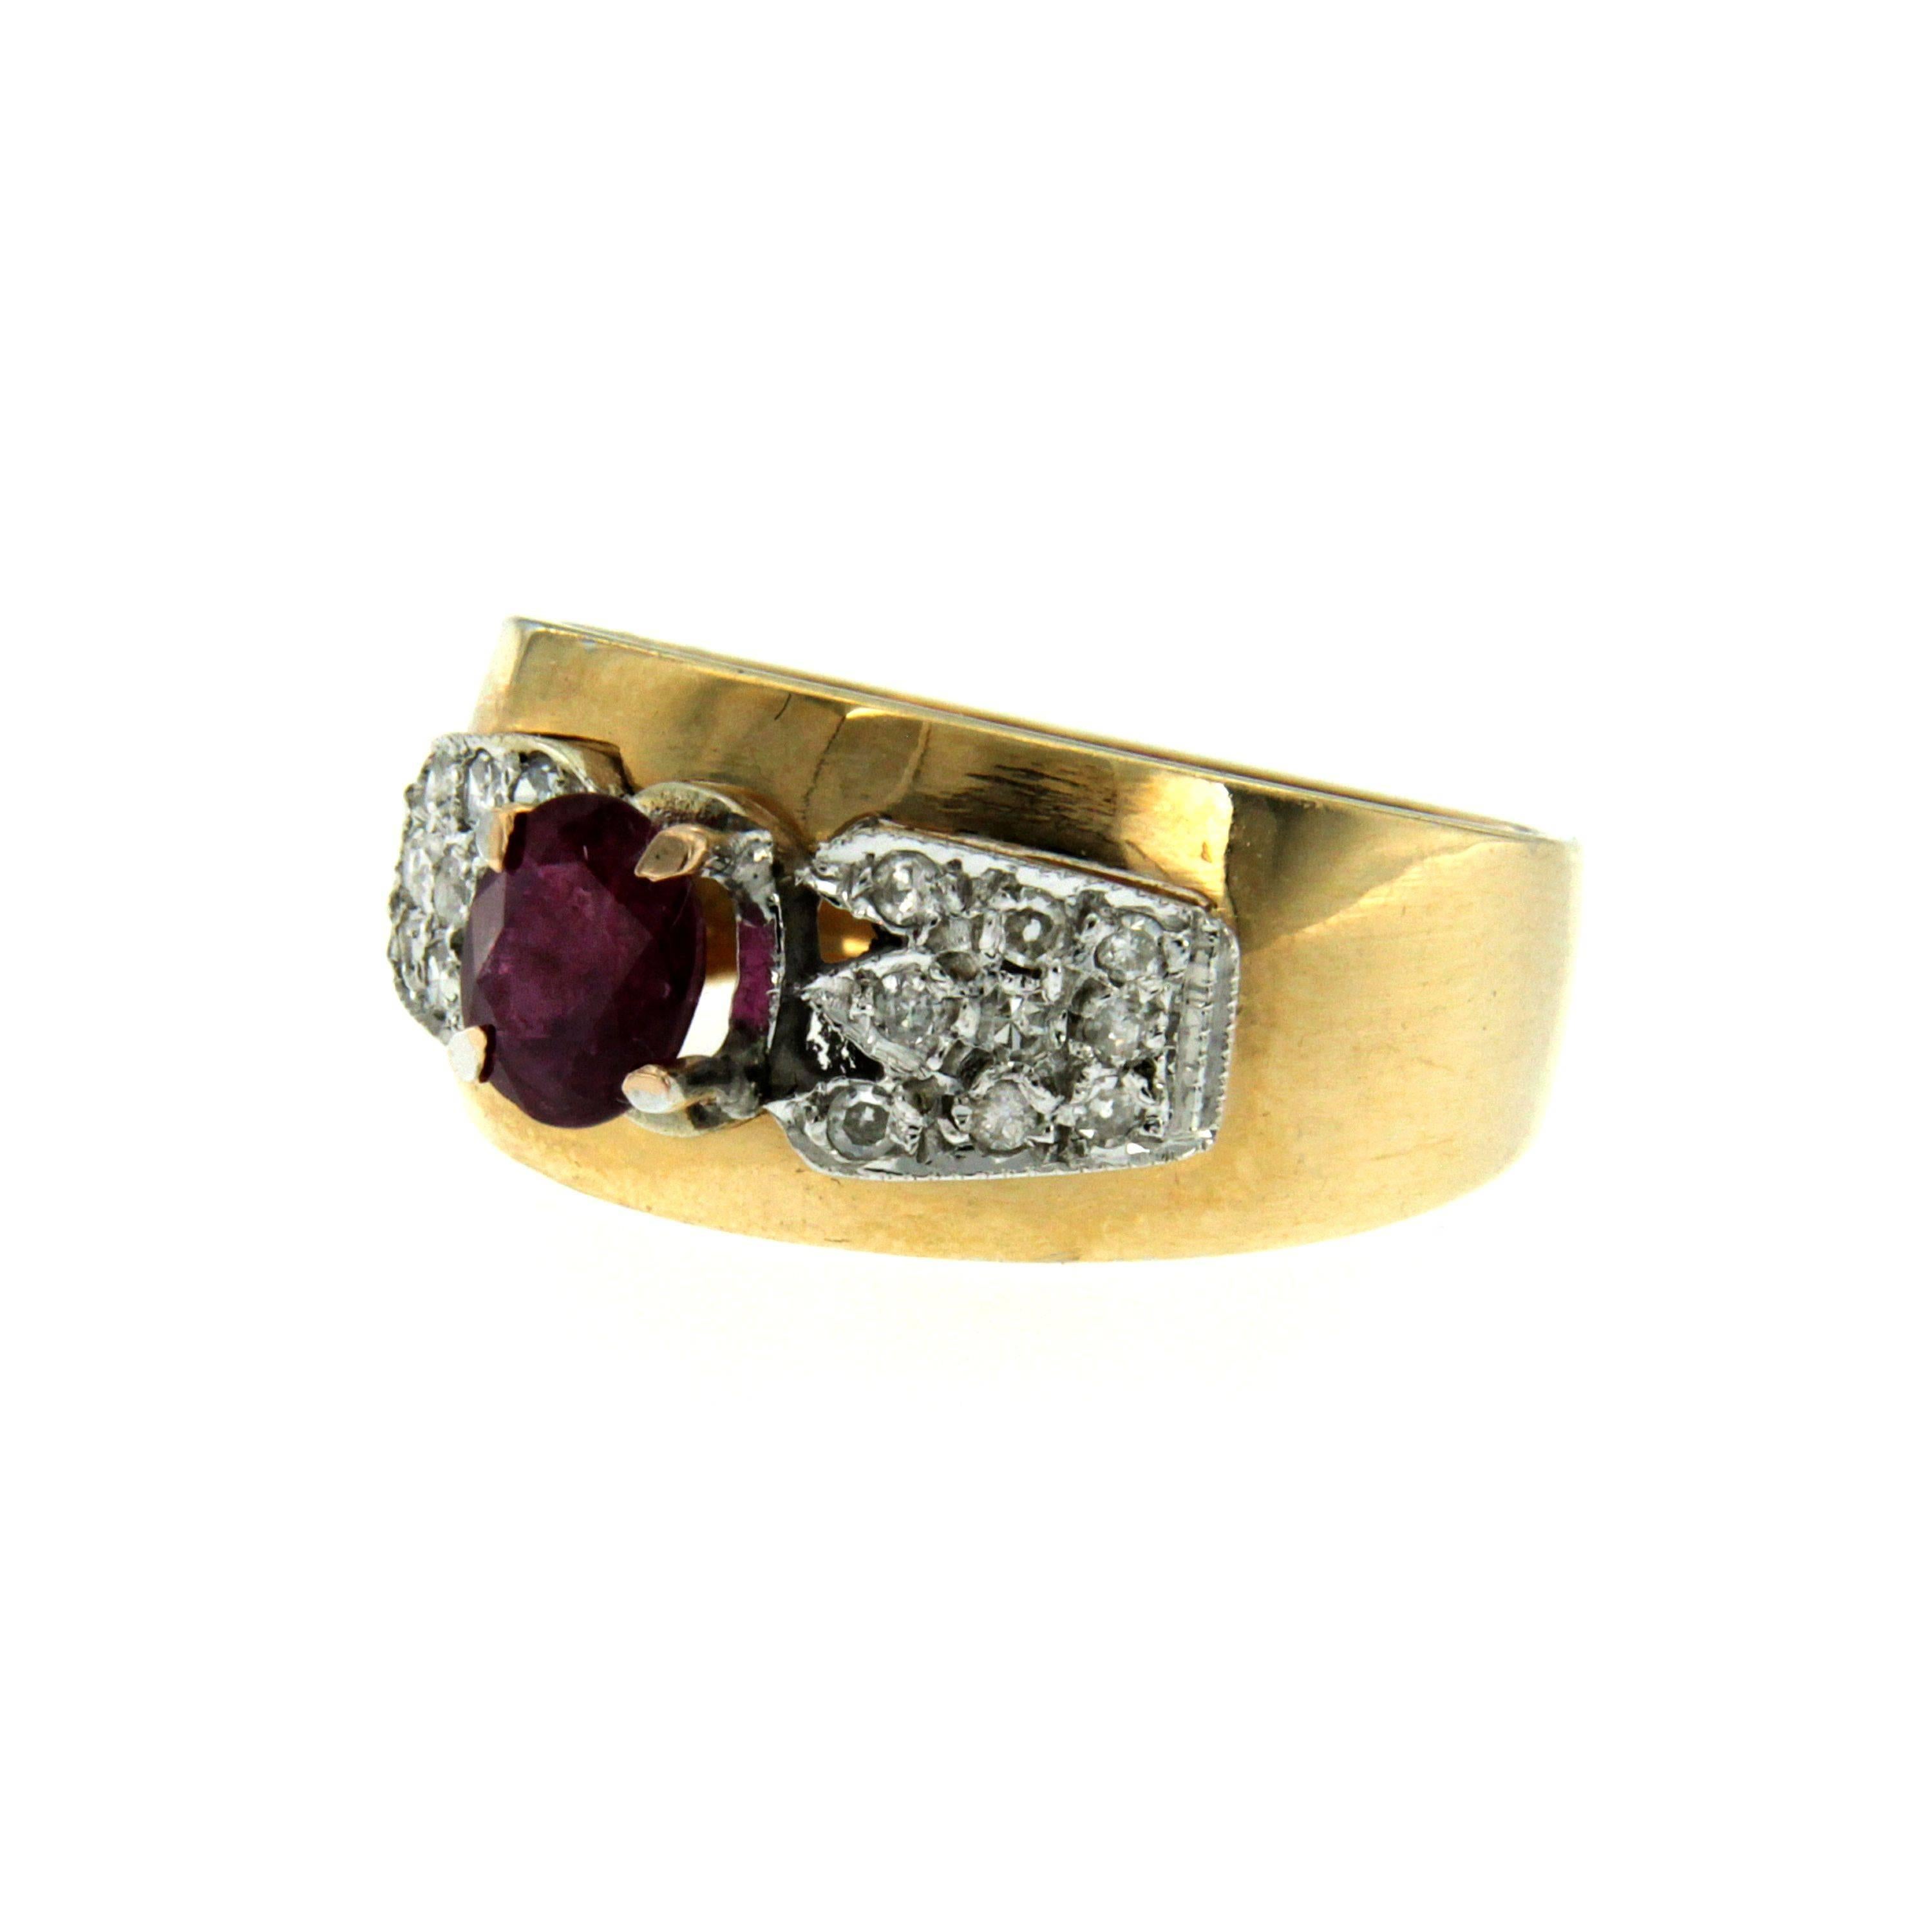 This vintage ring is handcrafted in 18k yellow gold set with an oval cut ruby weighing 0.80 carats accented by huit huit cut diamonds 0.20 total carats.

CONDITION: Pre-owned - Excellent
METAL: 18k Gold
GEM STONE: Ruby 0.80 total carats, Diamond